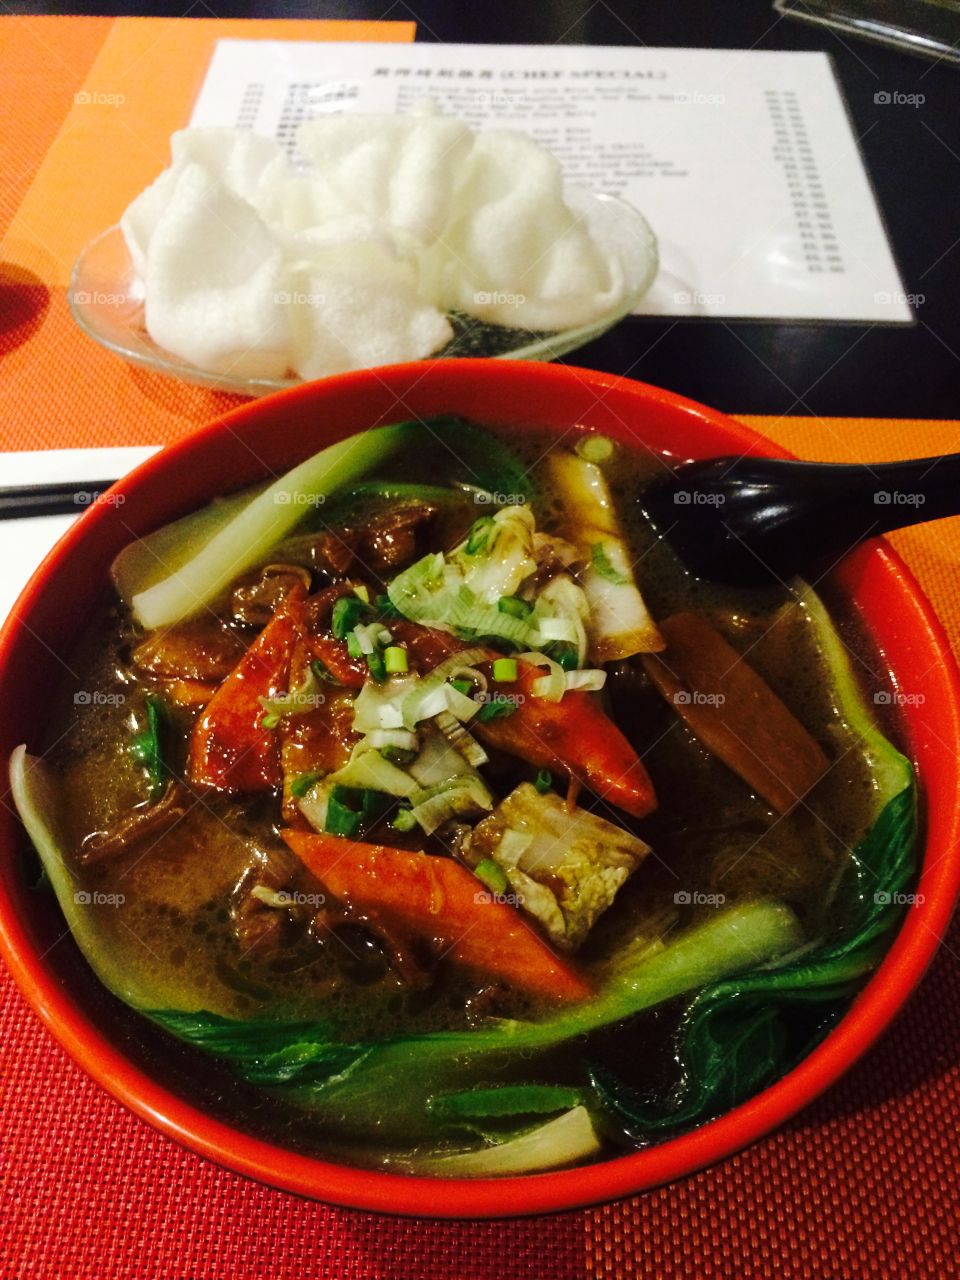 Beef noodle soup with prawn crackers 